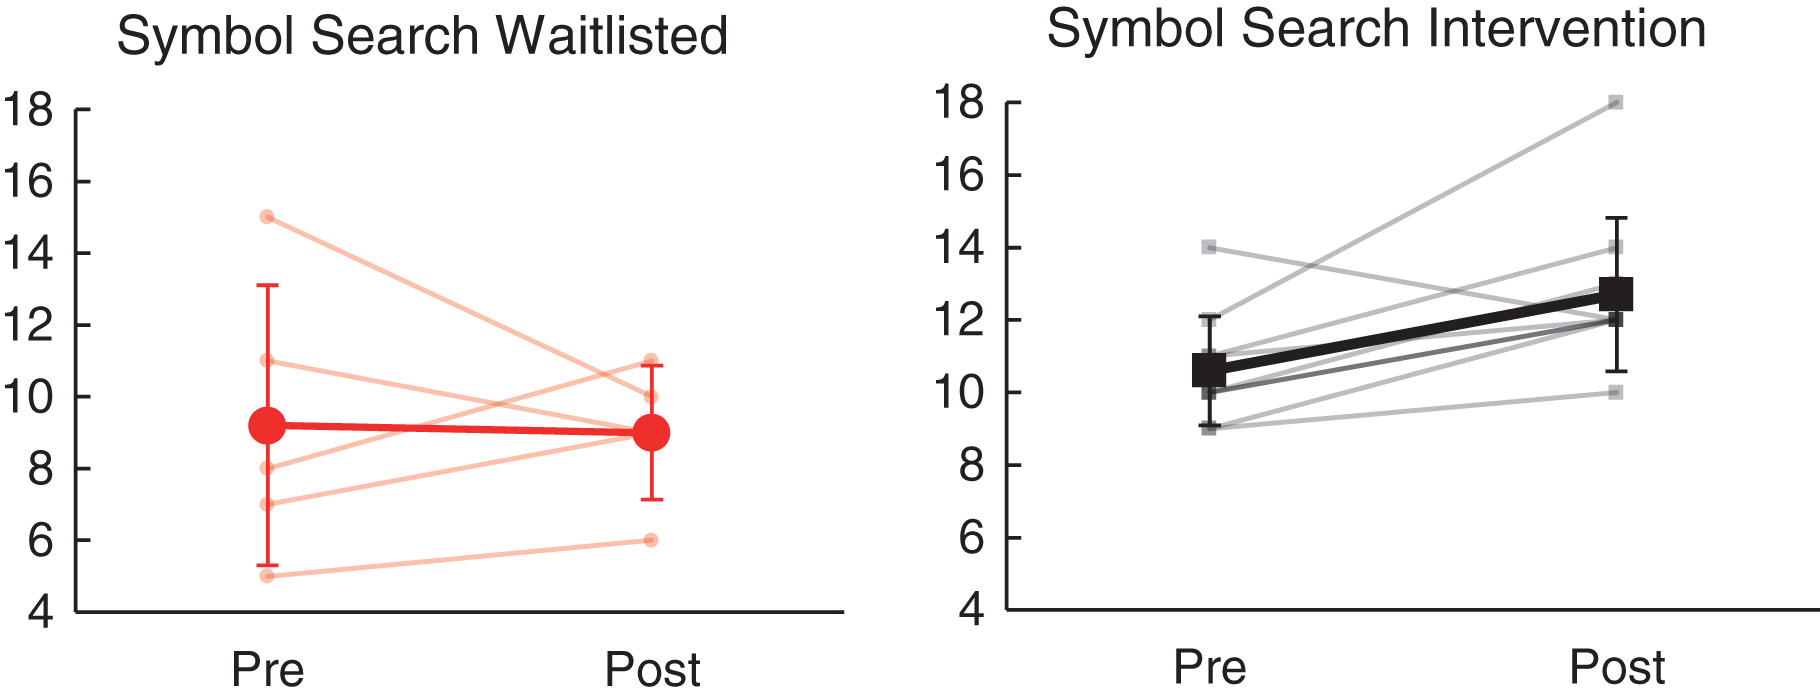 Effects of NeuroDRIVE intervention on visual search performance.